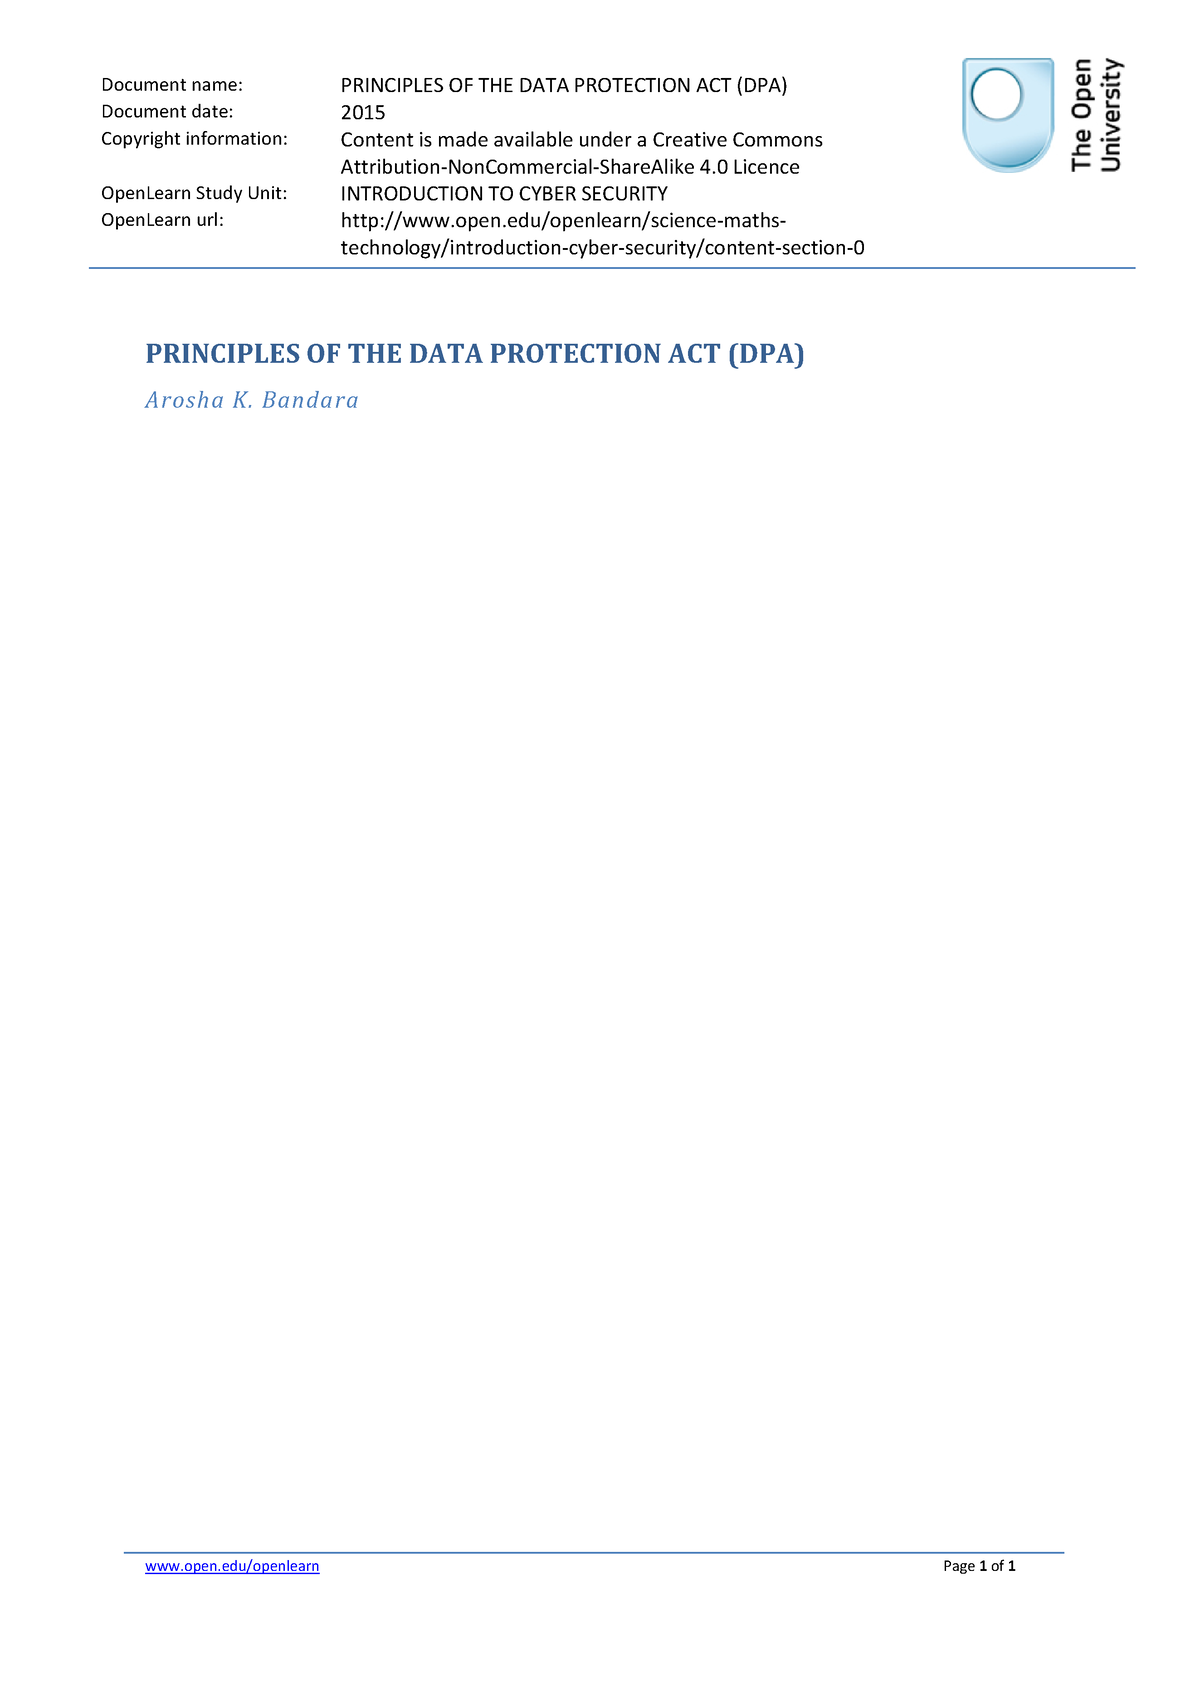 Principles Of Data Protection - Document name: PRINCIPLES OF THE DATA ...